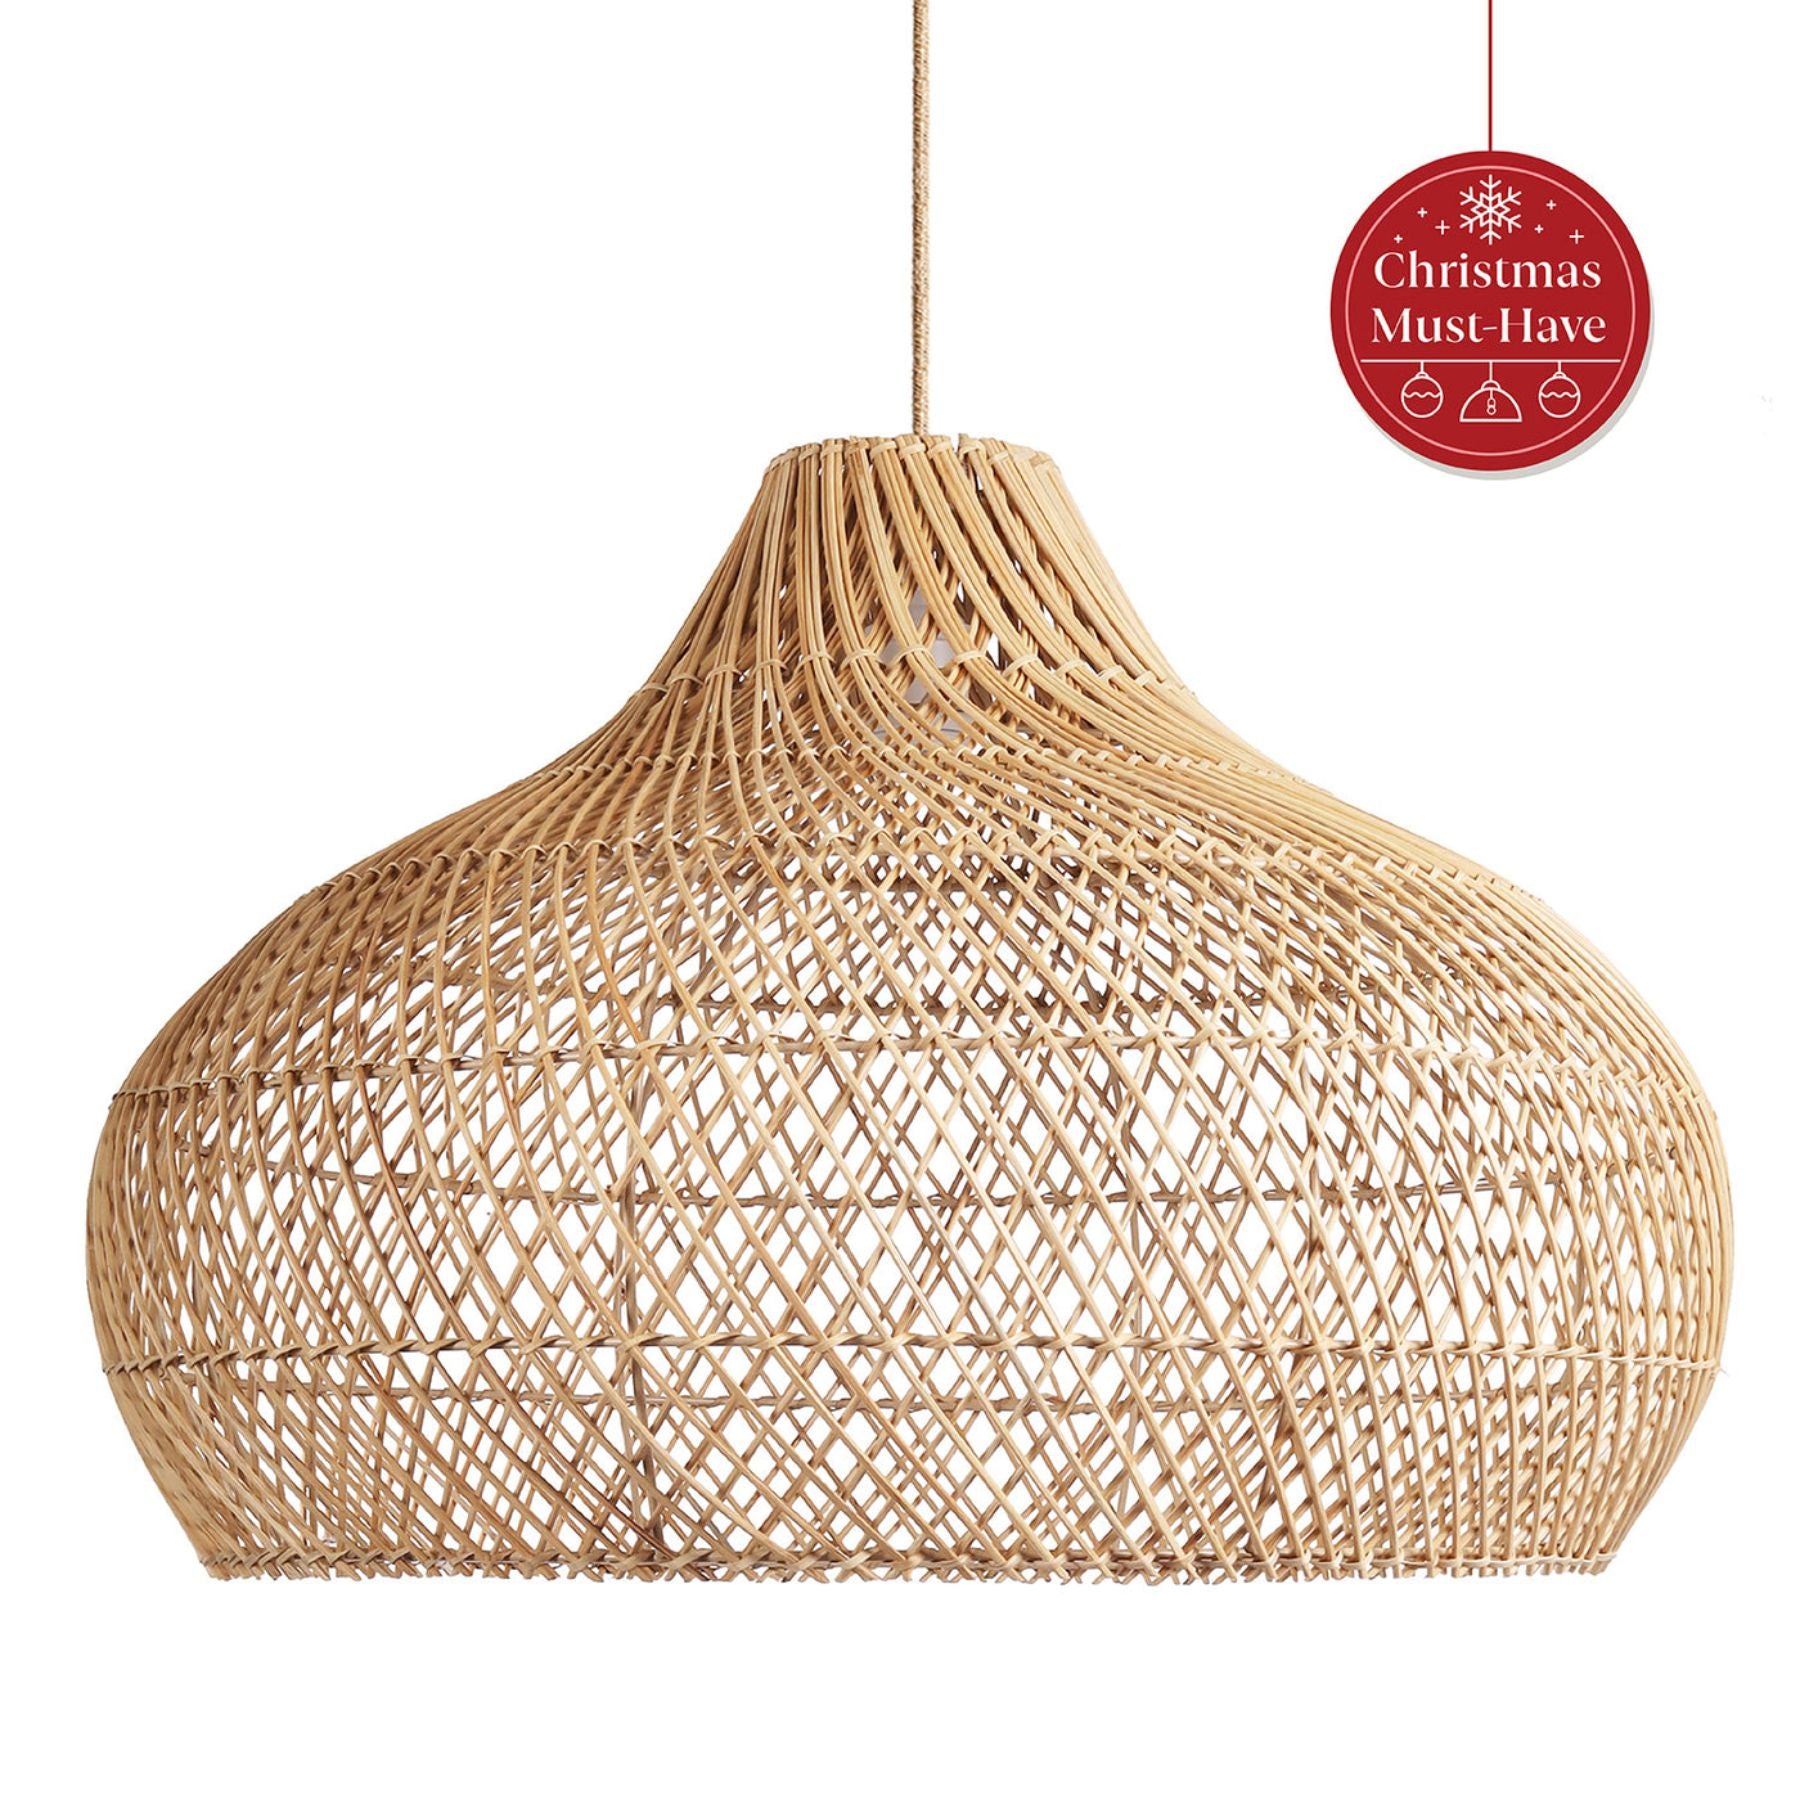 now you can get the kloe rattan pendant light for $124.60 after 30% off